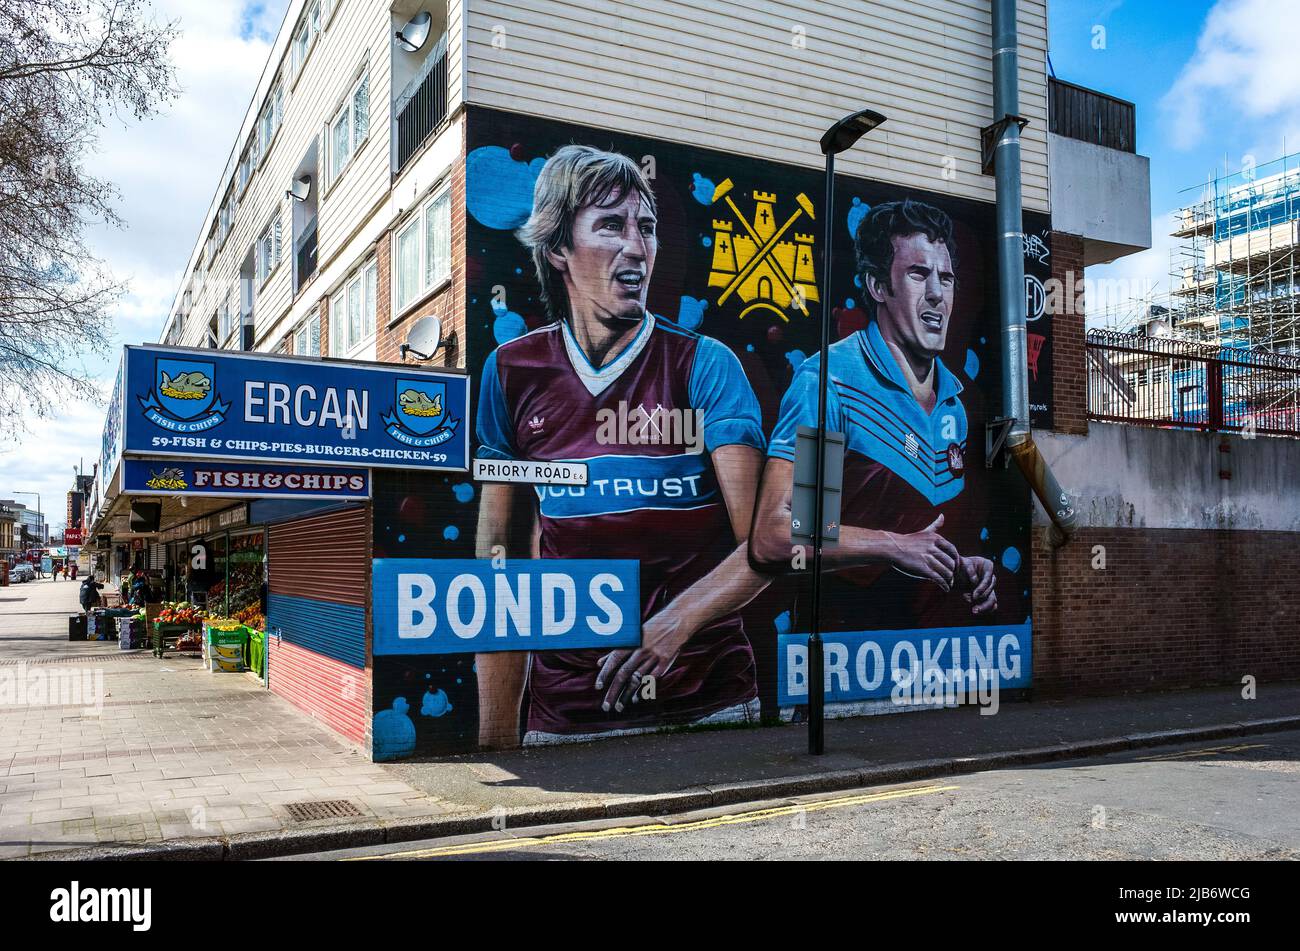 West Ham mural featuring Bonds and Brooking on Priory Road - football mural East London. Stock Photo